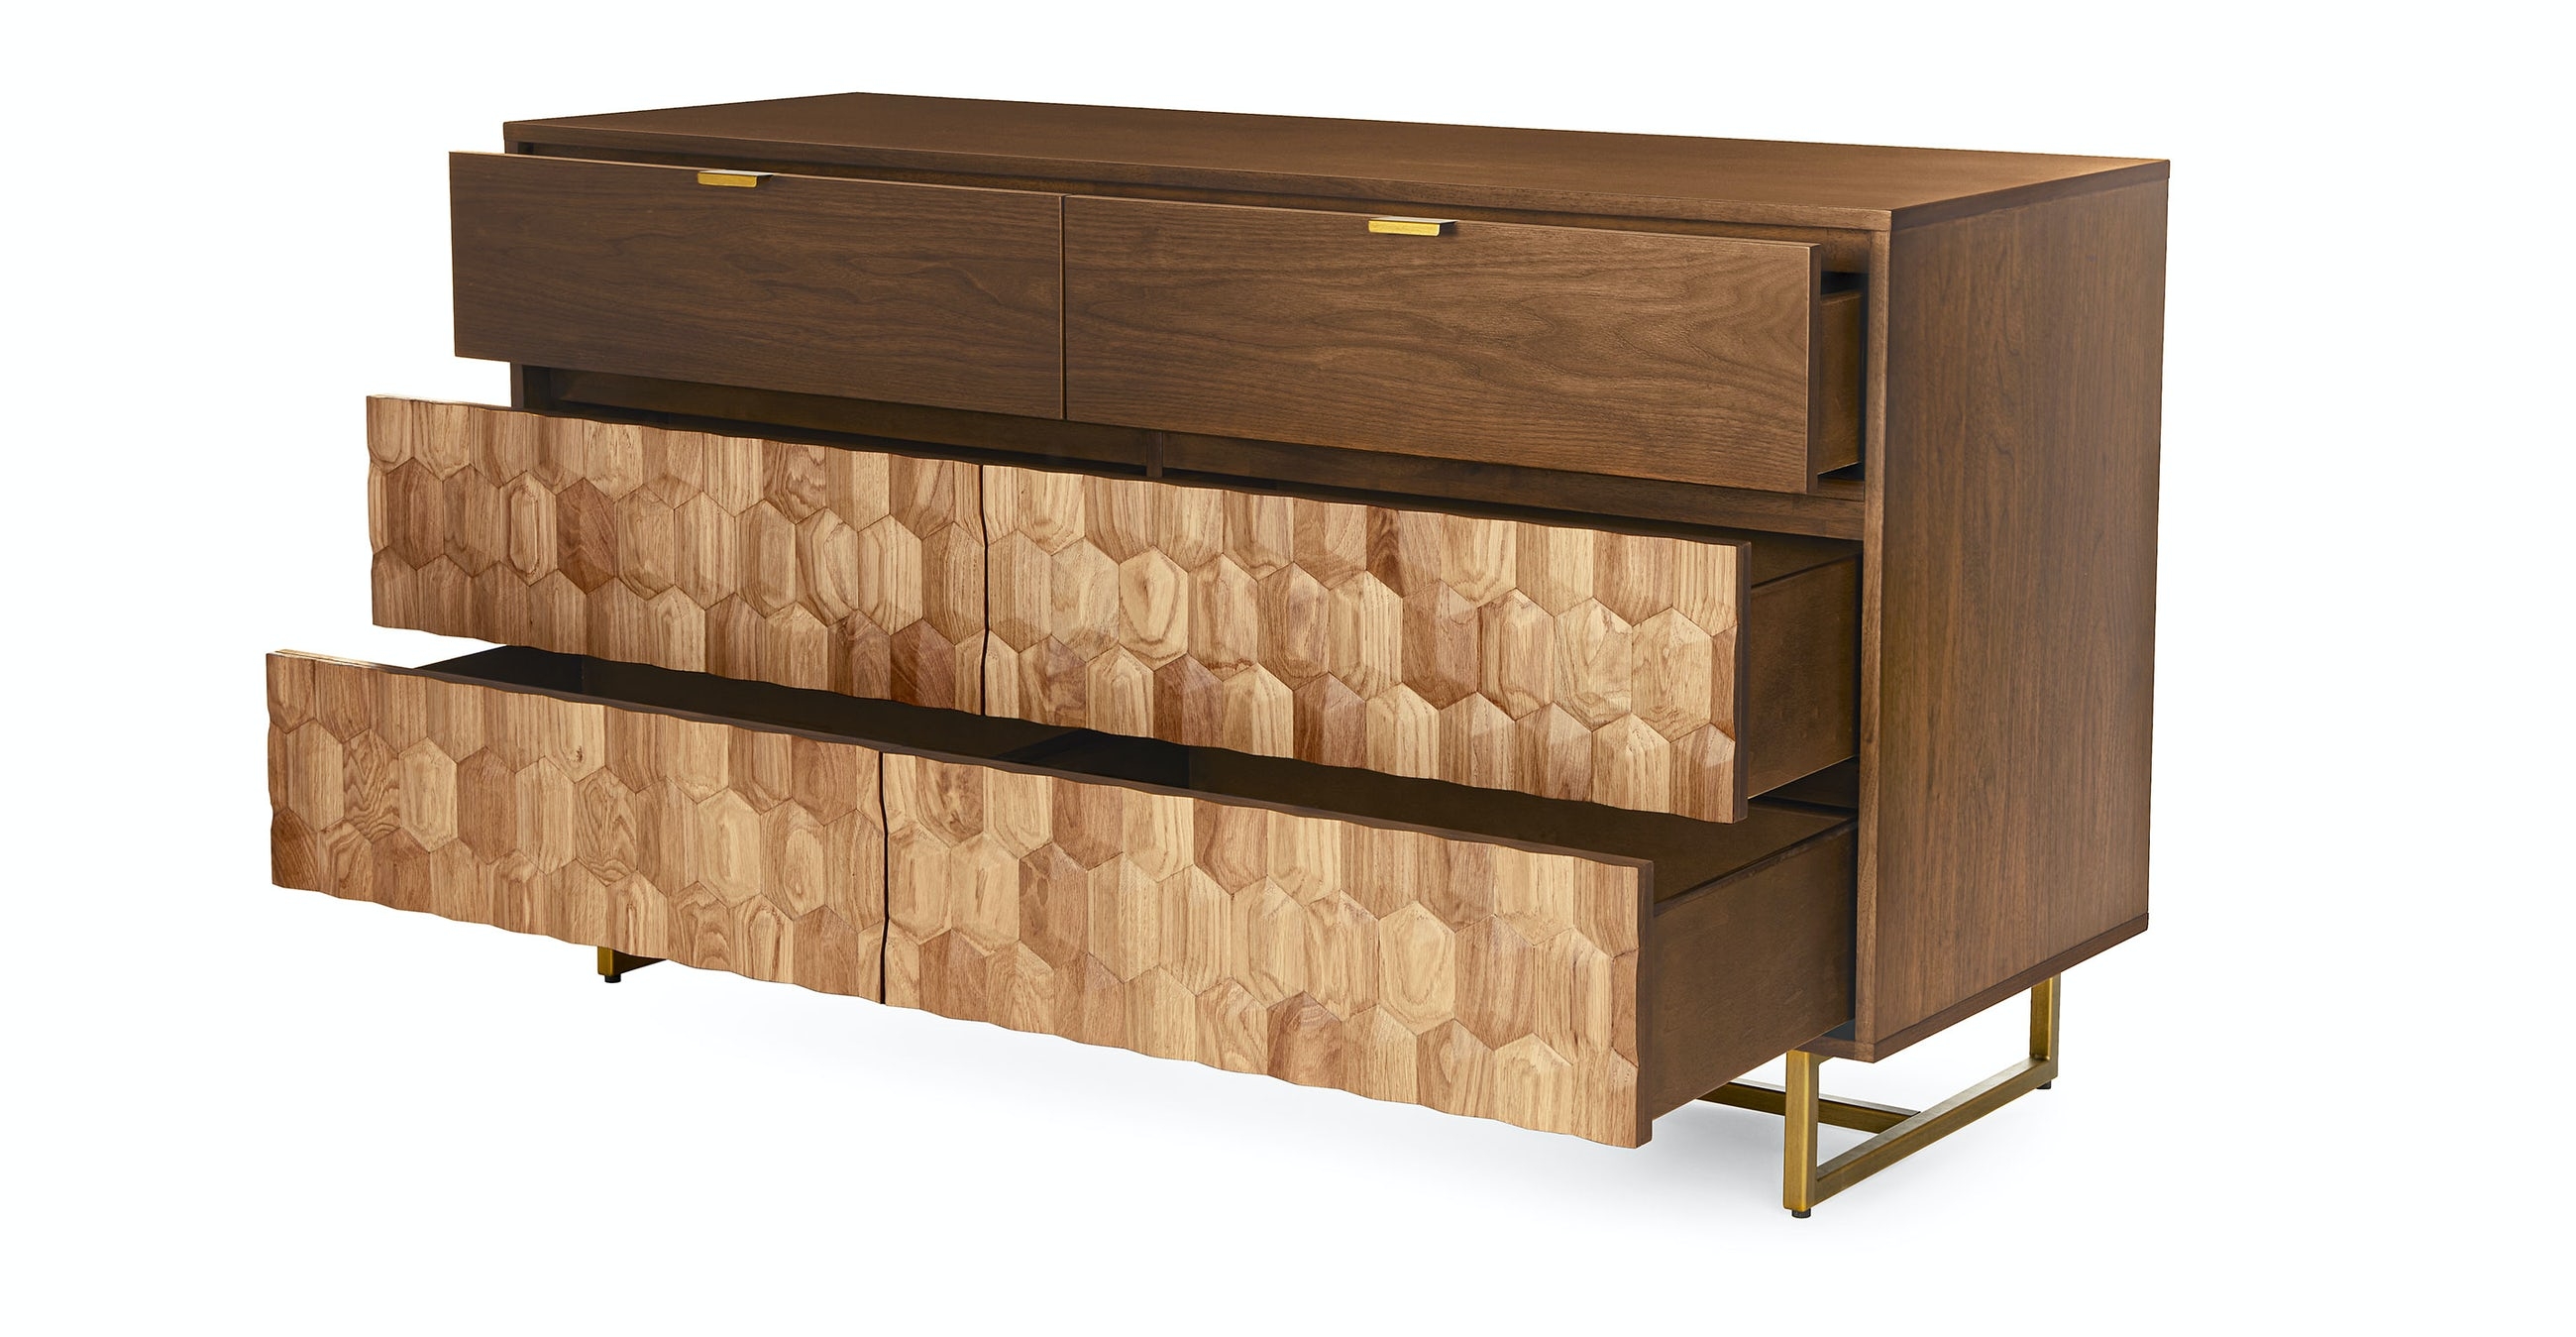 Geome 6 Drawer Double Dresser - Image 1